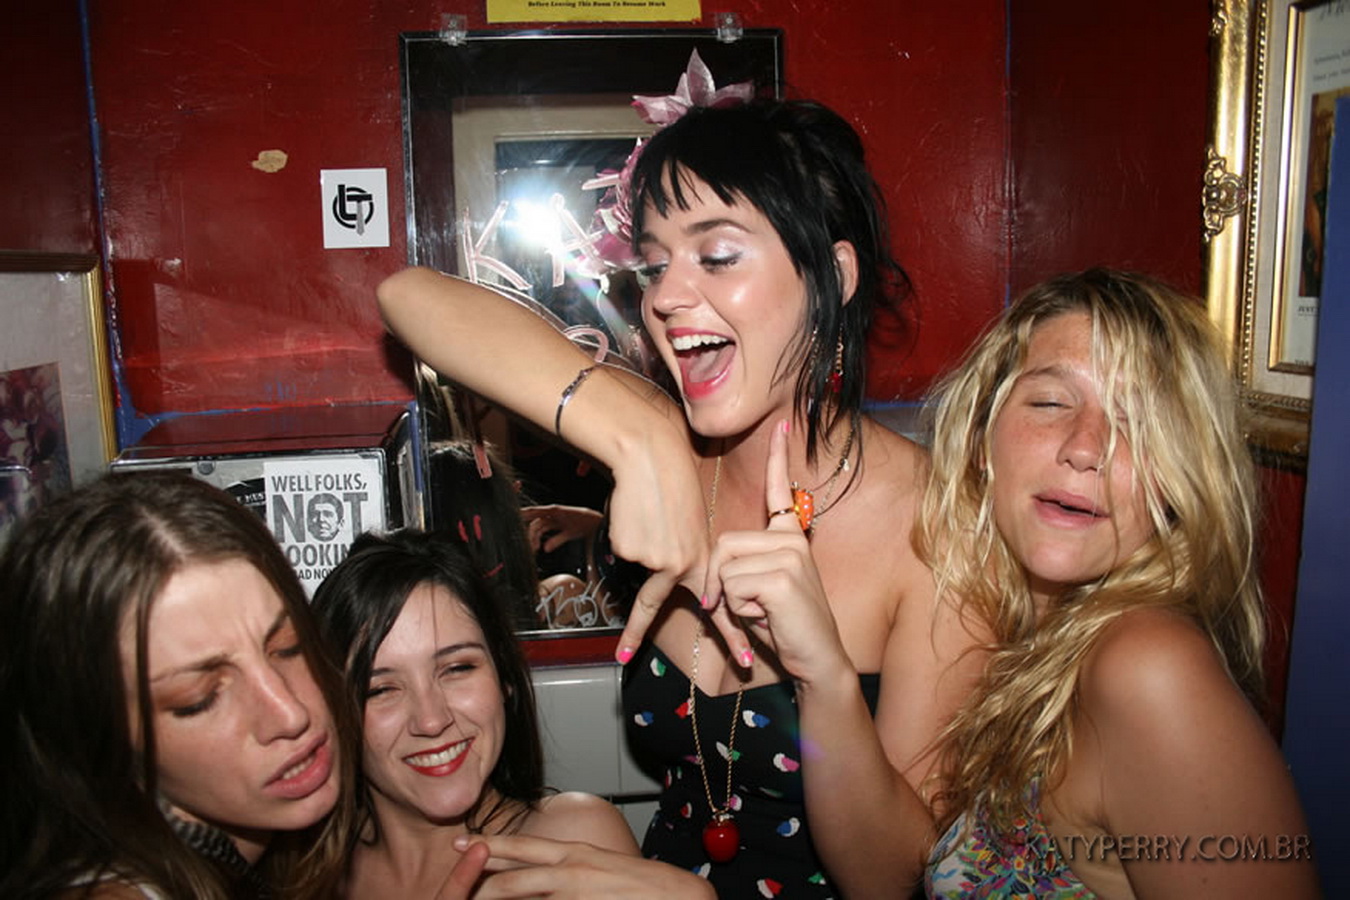 Katy_Perry_bobsslip_drunk_cleavage_downblouse_upskirt_nipslip_at_her_birthday_2007_party_99x_HQ_93.jpg